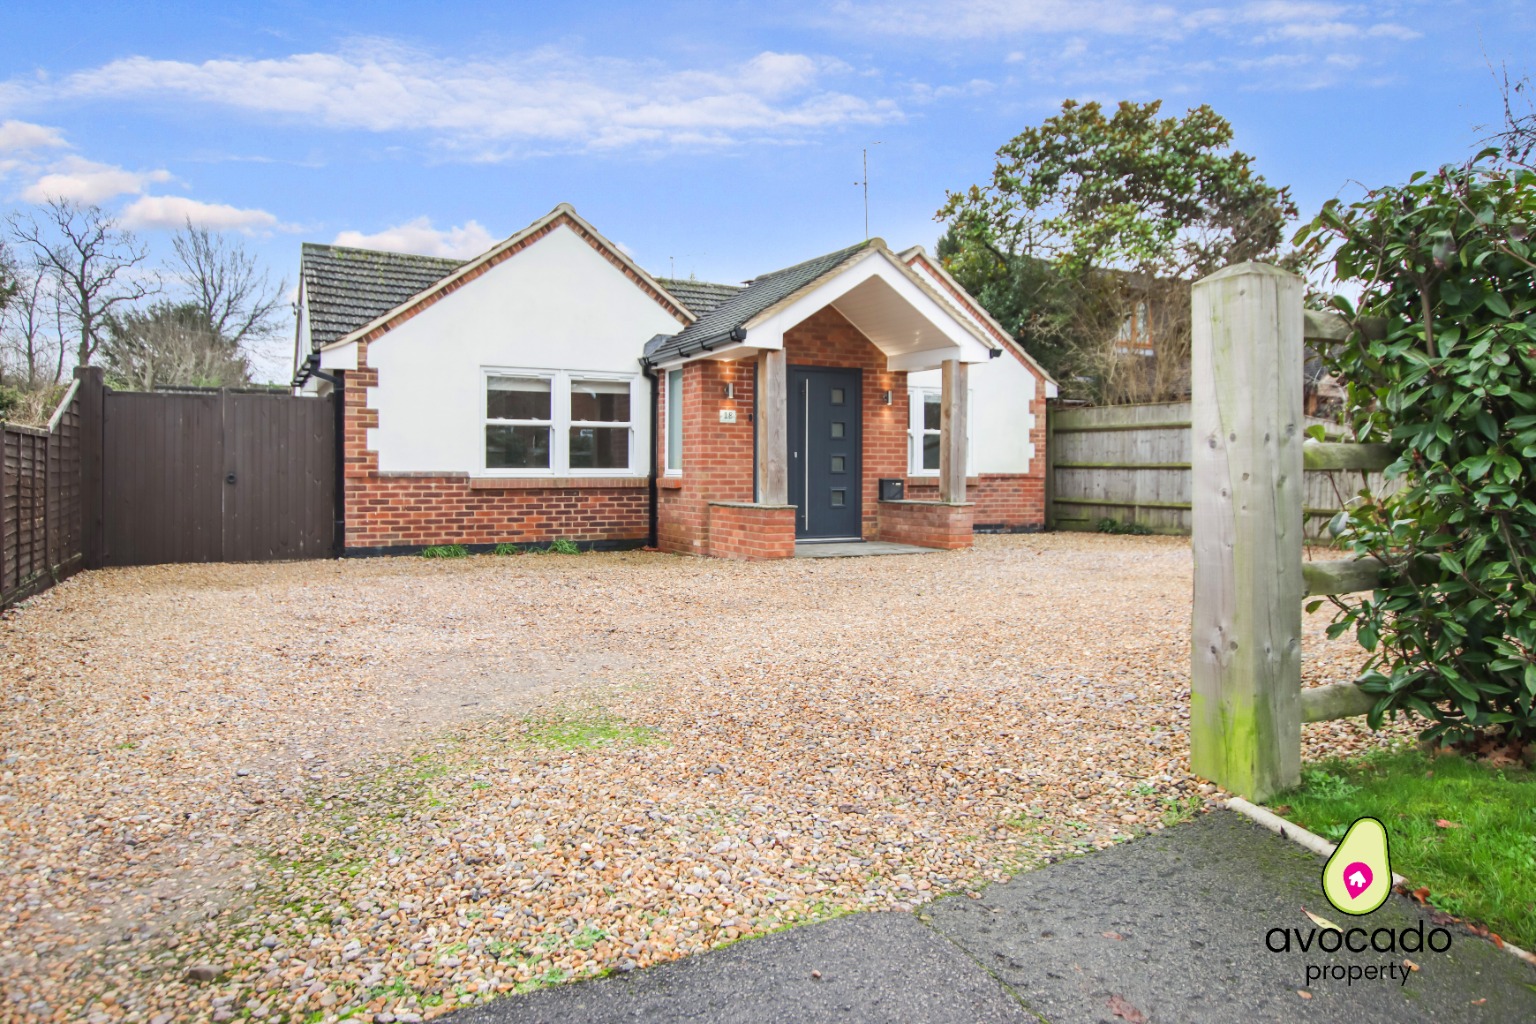 Looking for a modern and well presented Bungalow in GU17? Look no further!